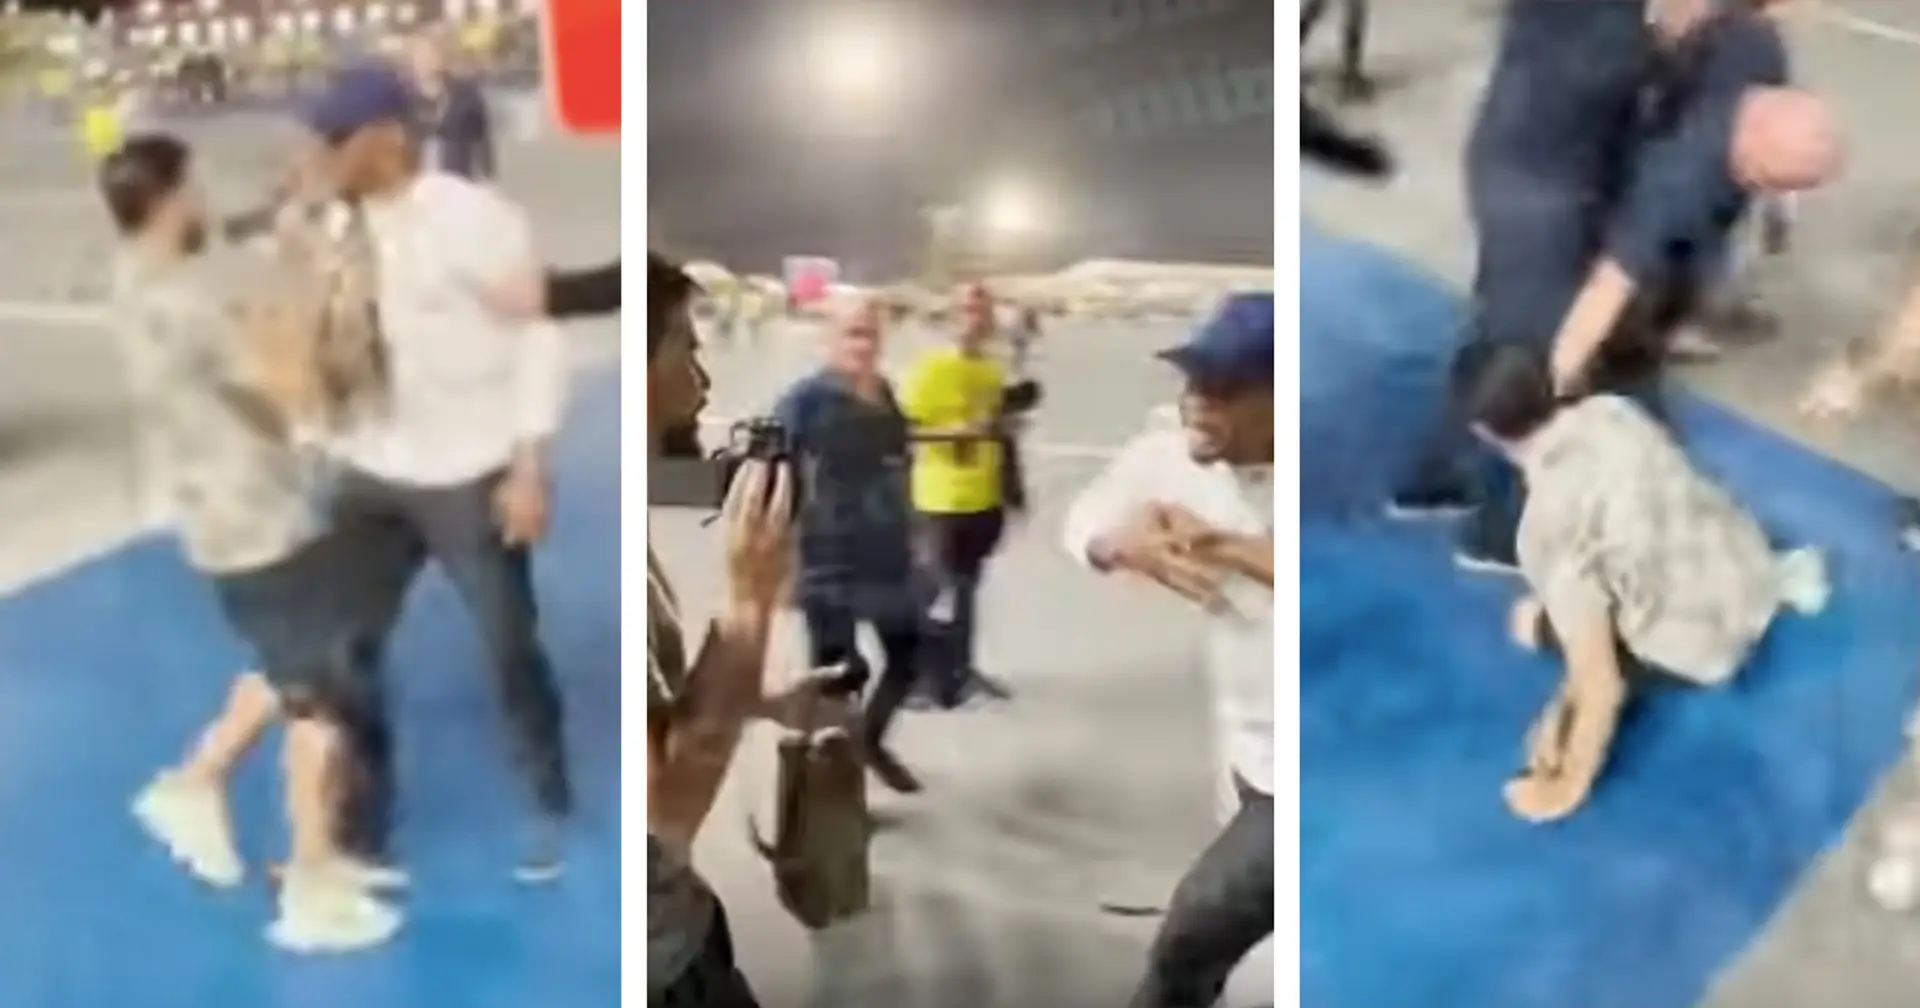 Shocking footage shows Eto'o kicking a man with his knee outside World Cup stadium